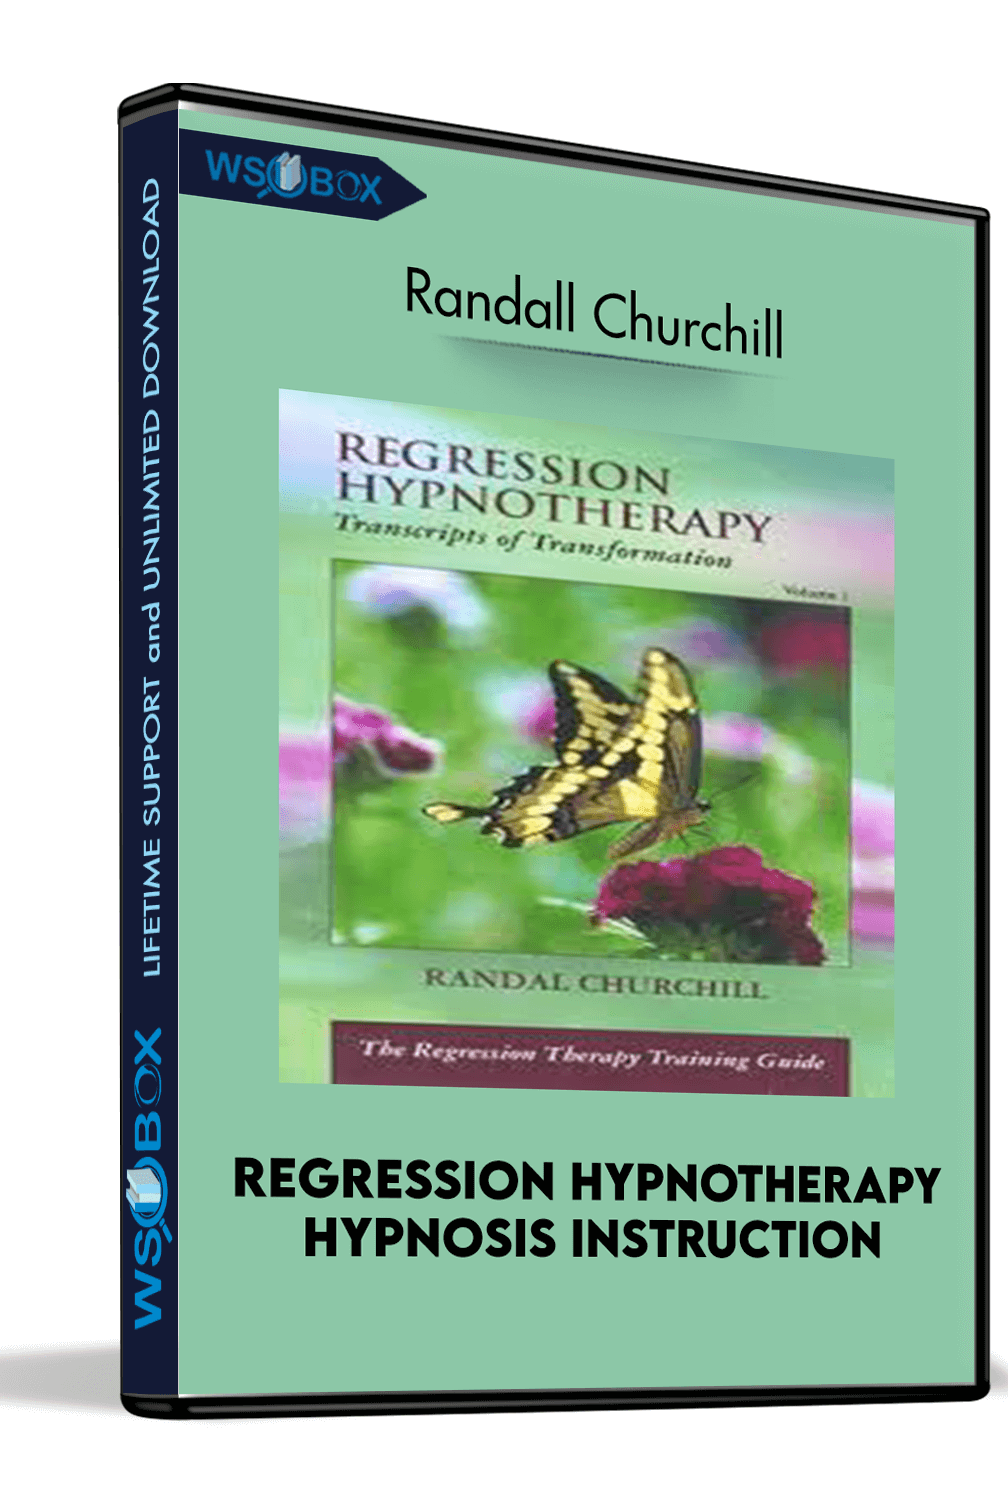 Regression Hypnotherapy Hypnosis Instruction – Randall Churchill